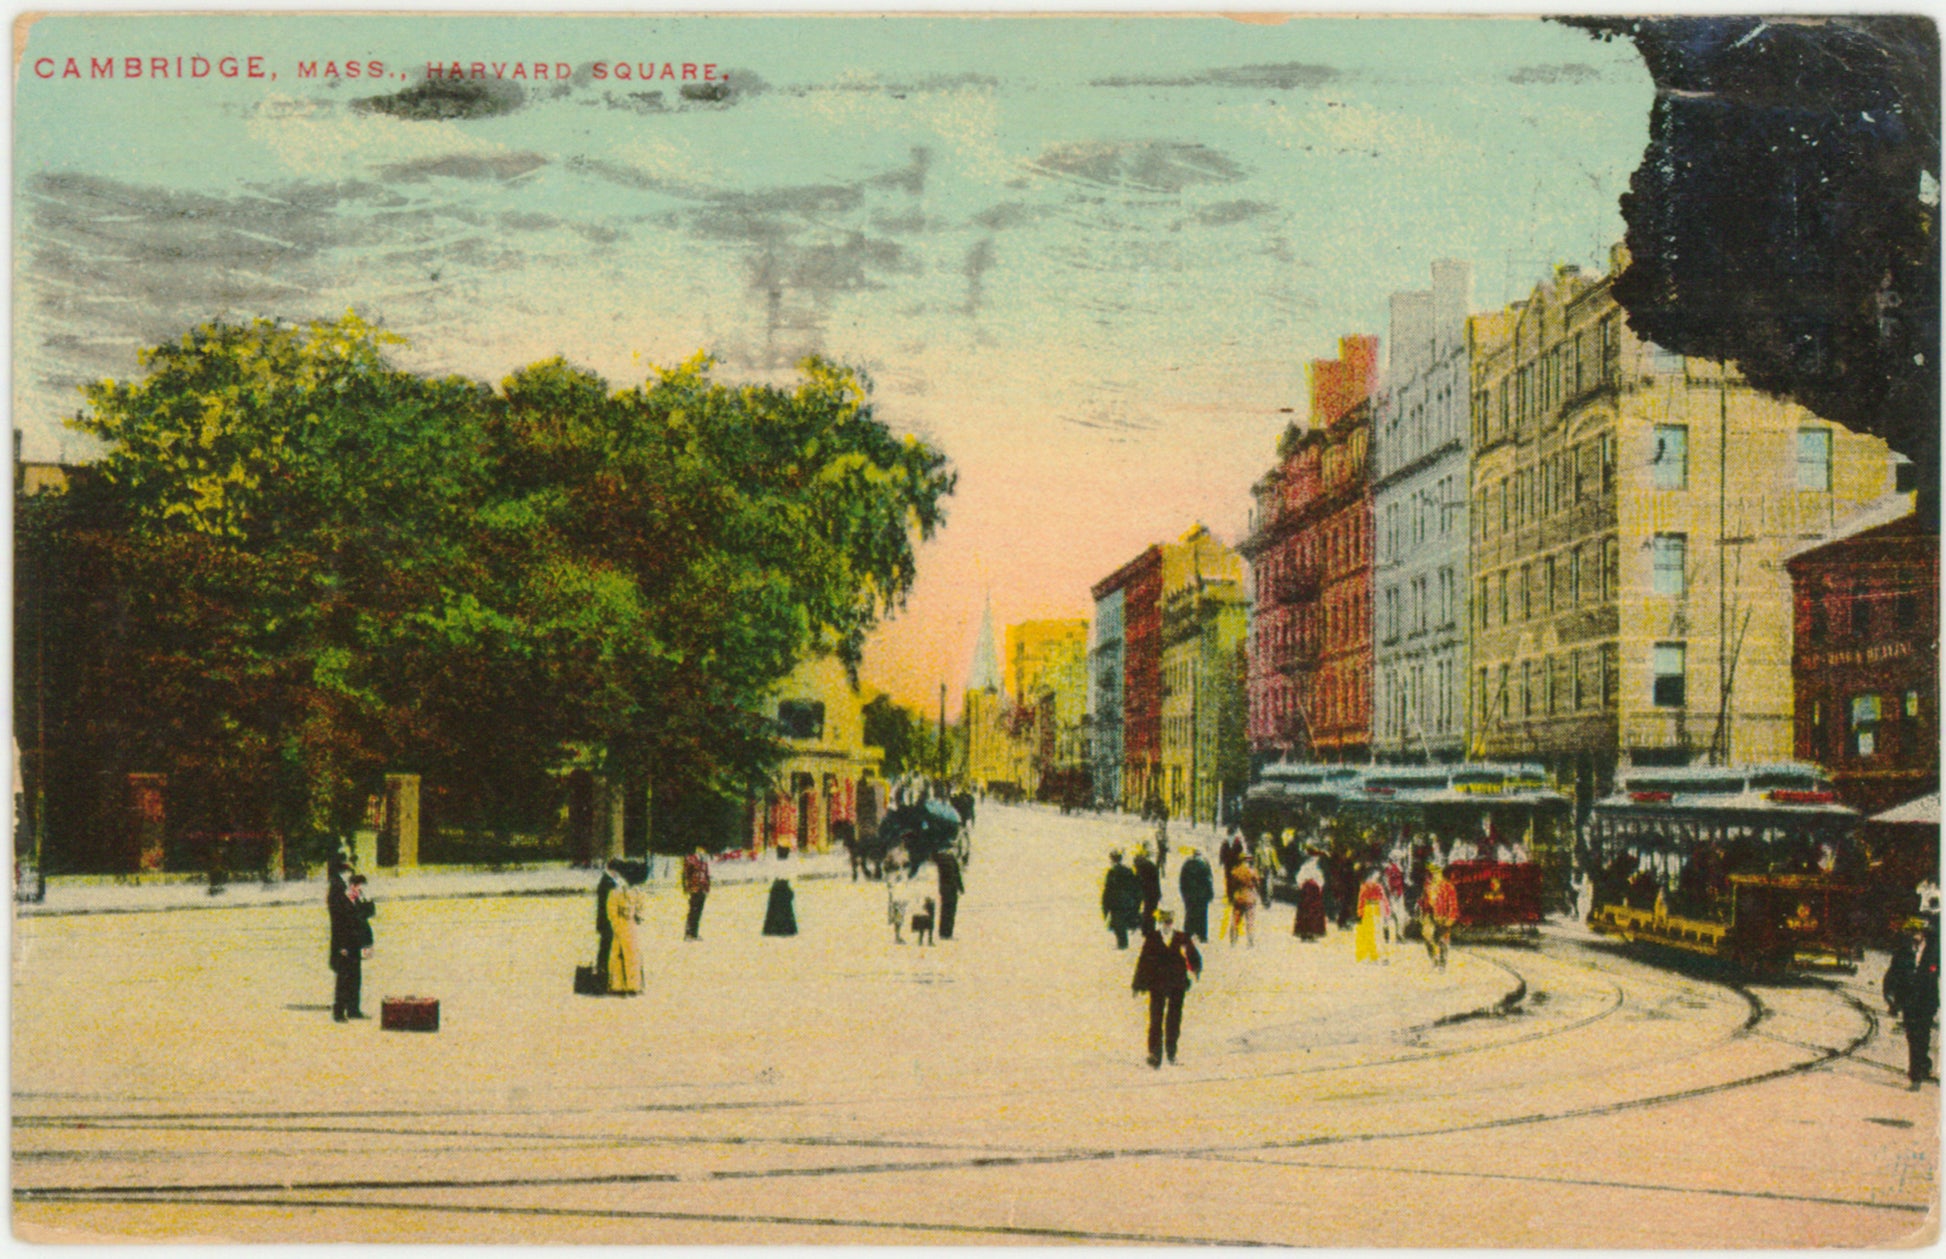 Vintage Postcard: Harvard Square showing Cambridge Common and Streetcars